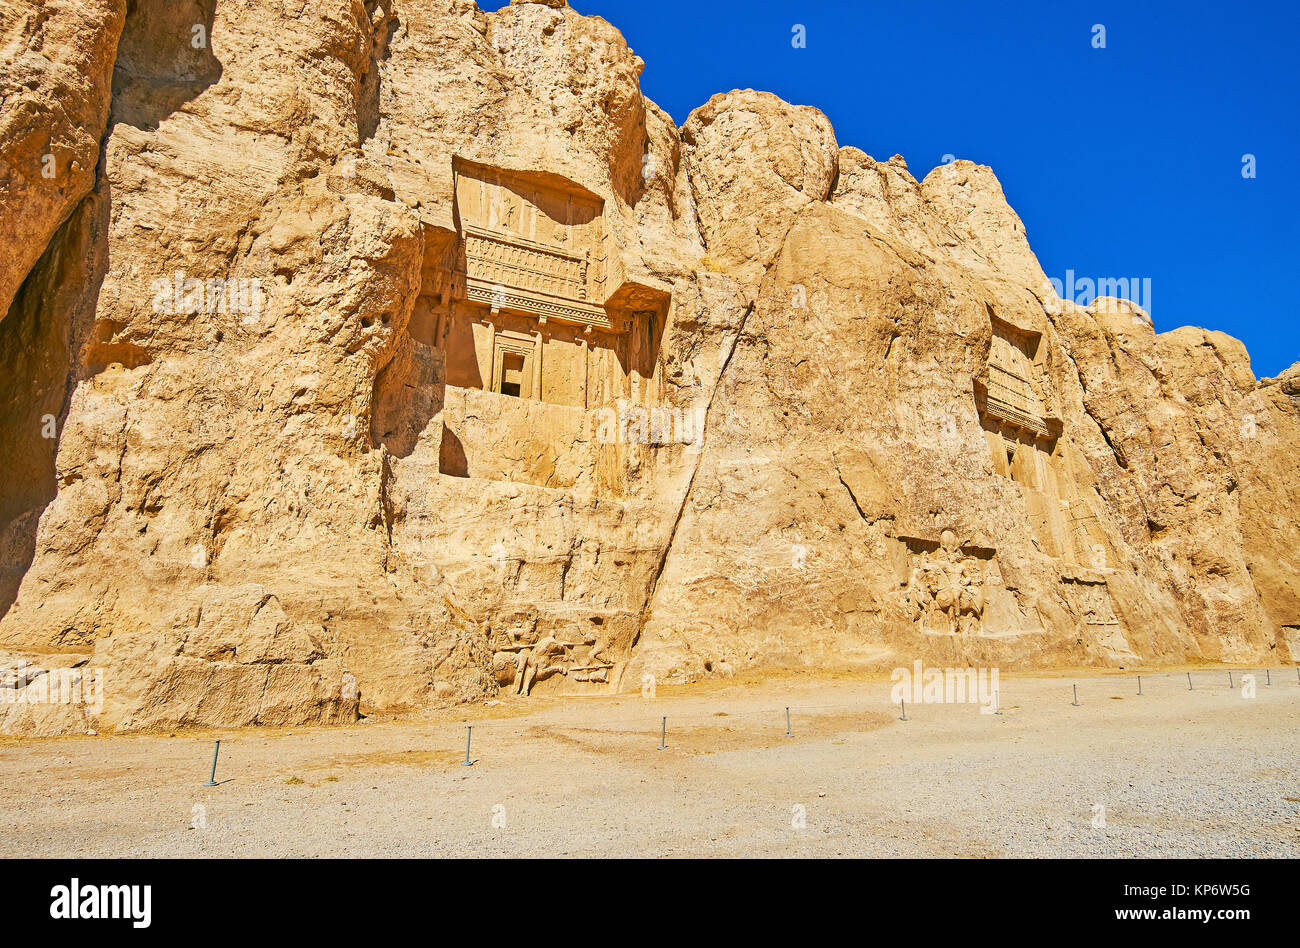 Archaeological zone of Naqsh-e Rustam Necropolis is the famous tourist destination with preserved ancient tombs, cut in rocky cliff, Iran. Stock Photo